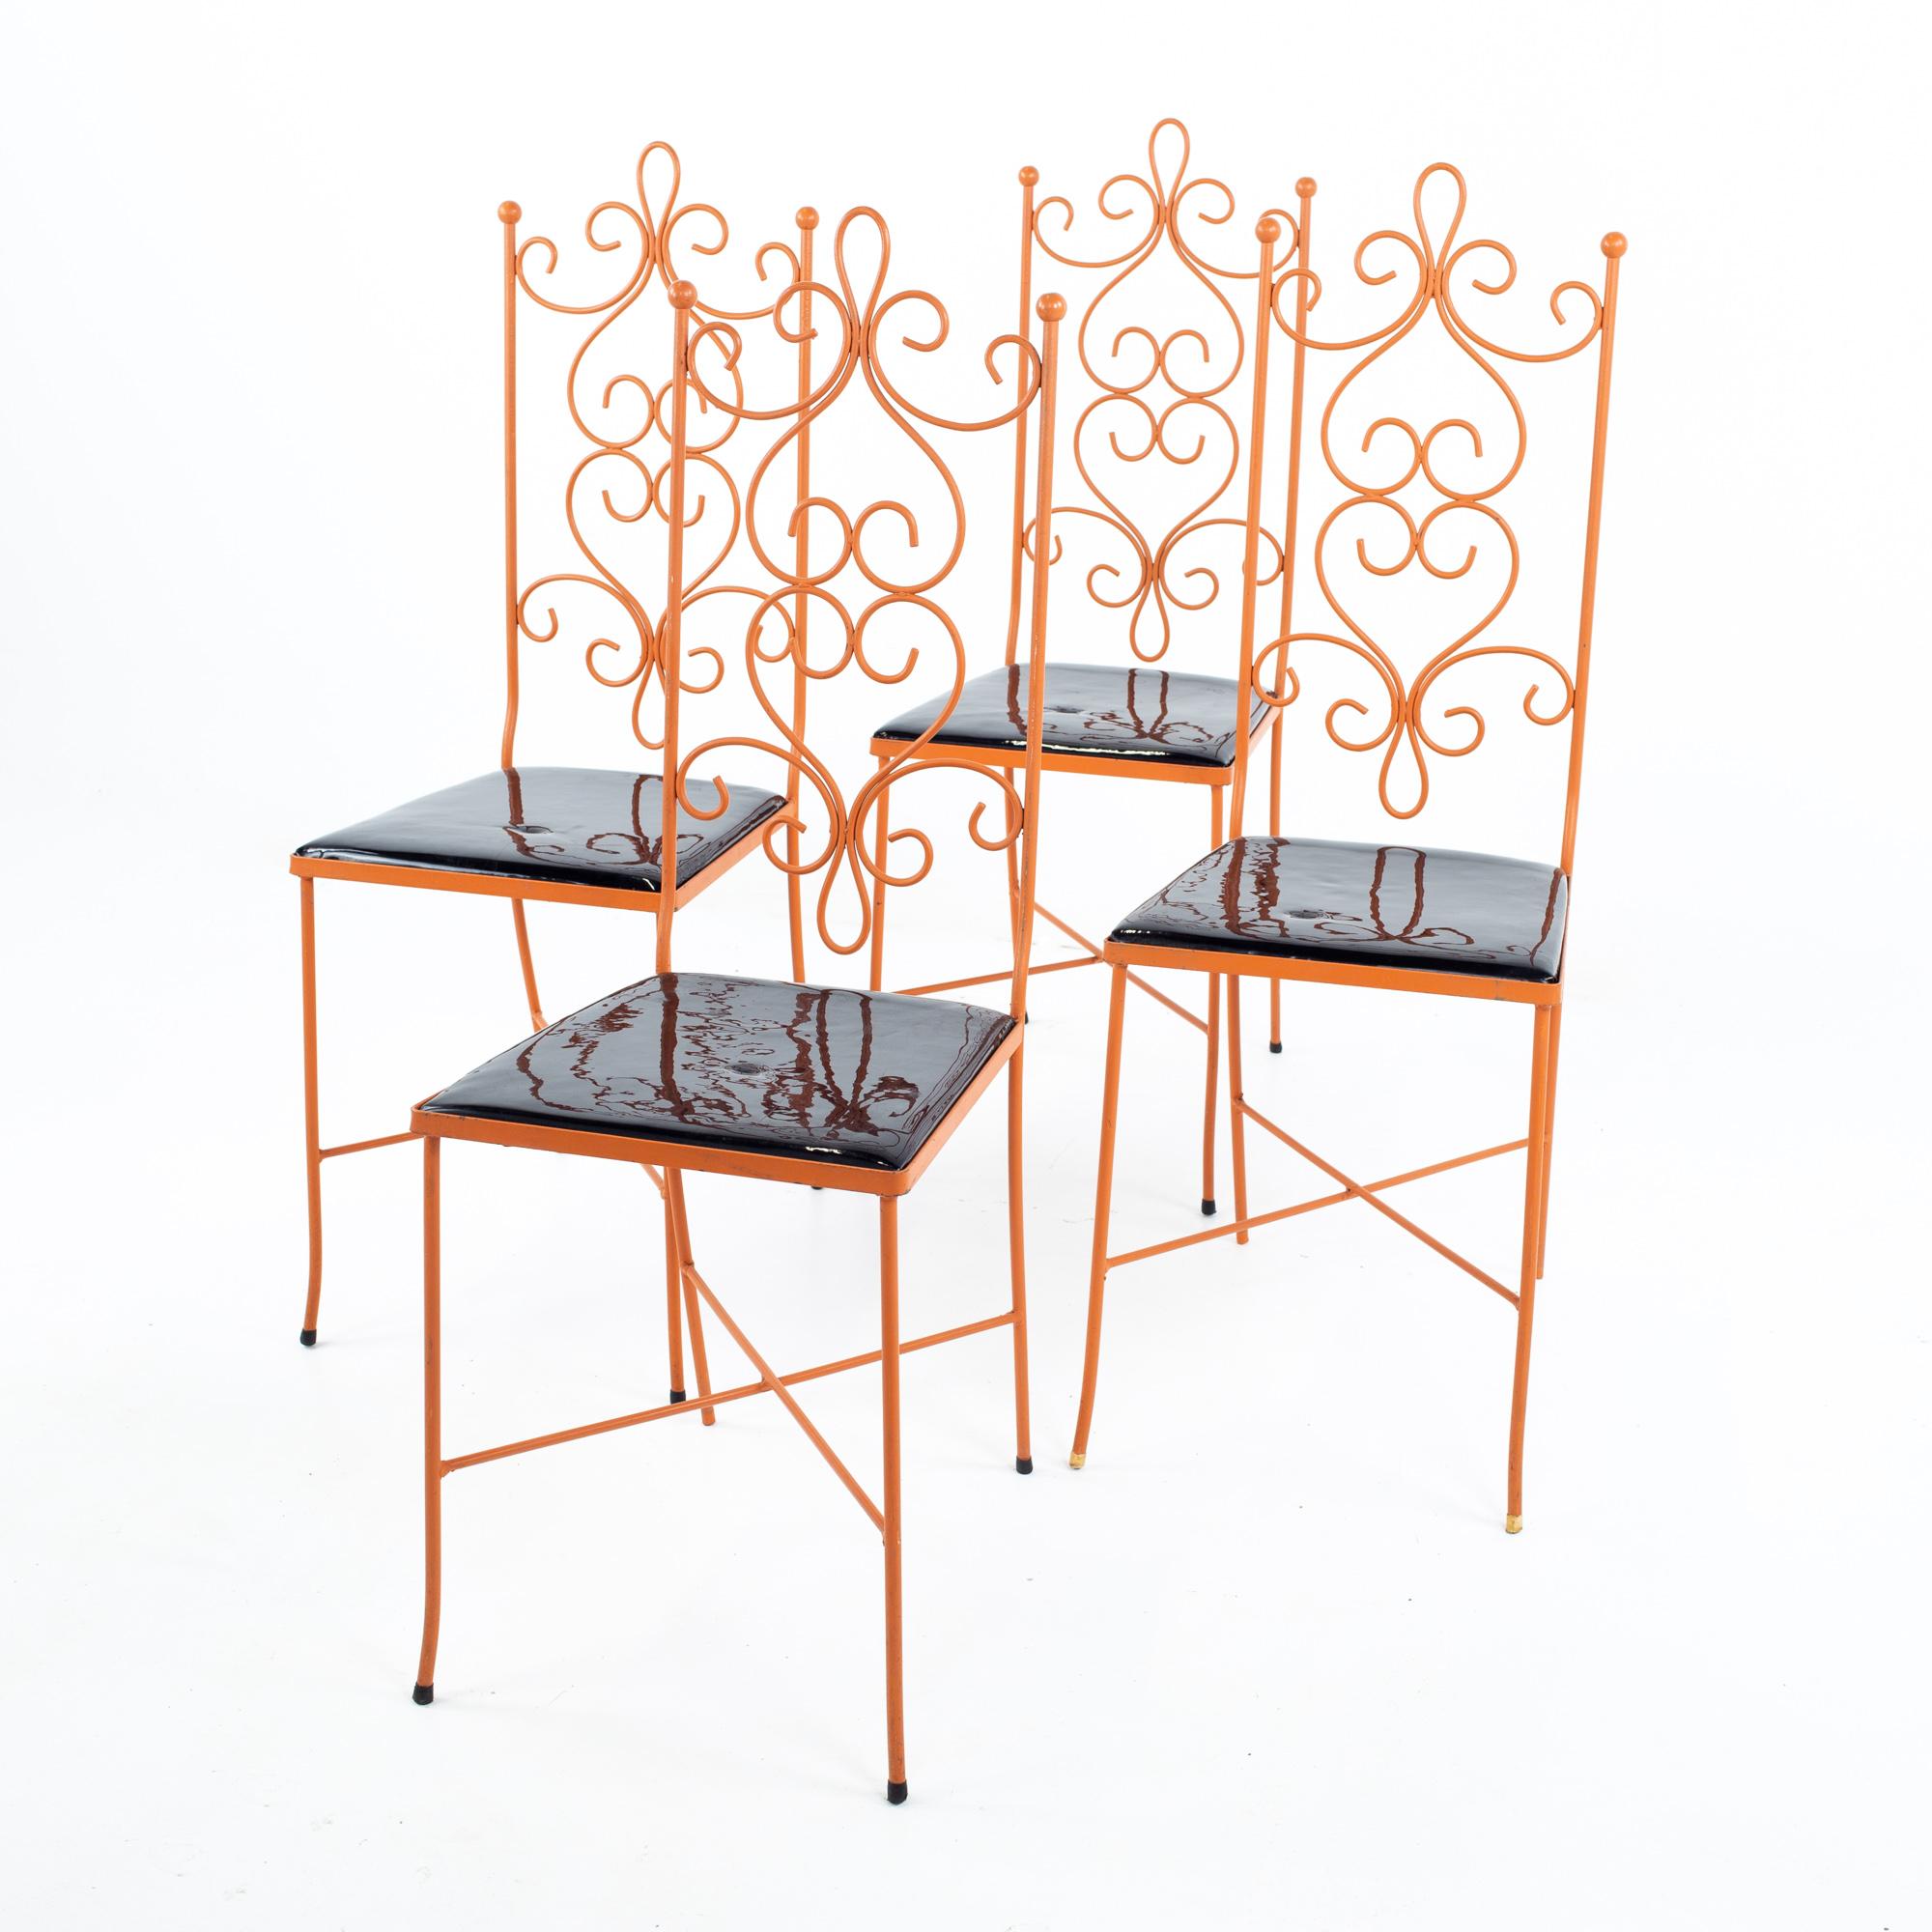 Arthur Umanoff style mid century orange metal dining chairs - set of 4
Each chair measures: 13.5 wide x 15.5 deep x 38 high, with a seat height of 17.25

All pieces of furniture can be had in what we call restored vintage condition. That means